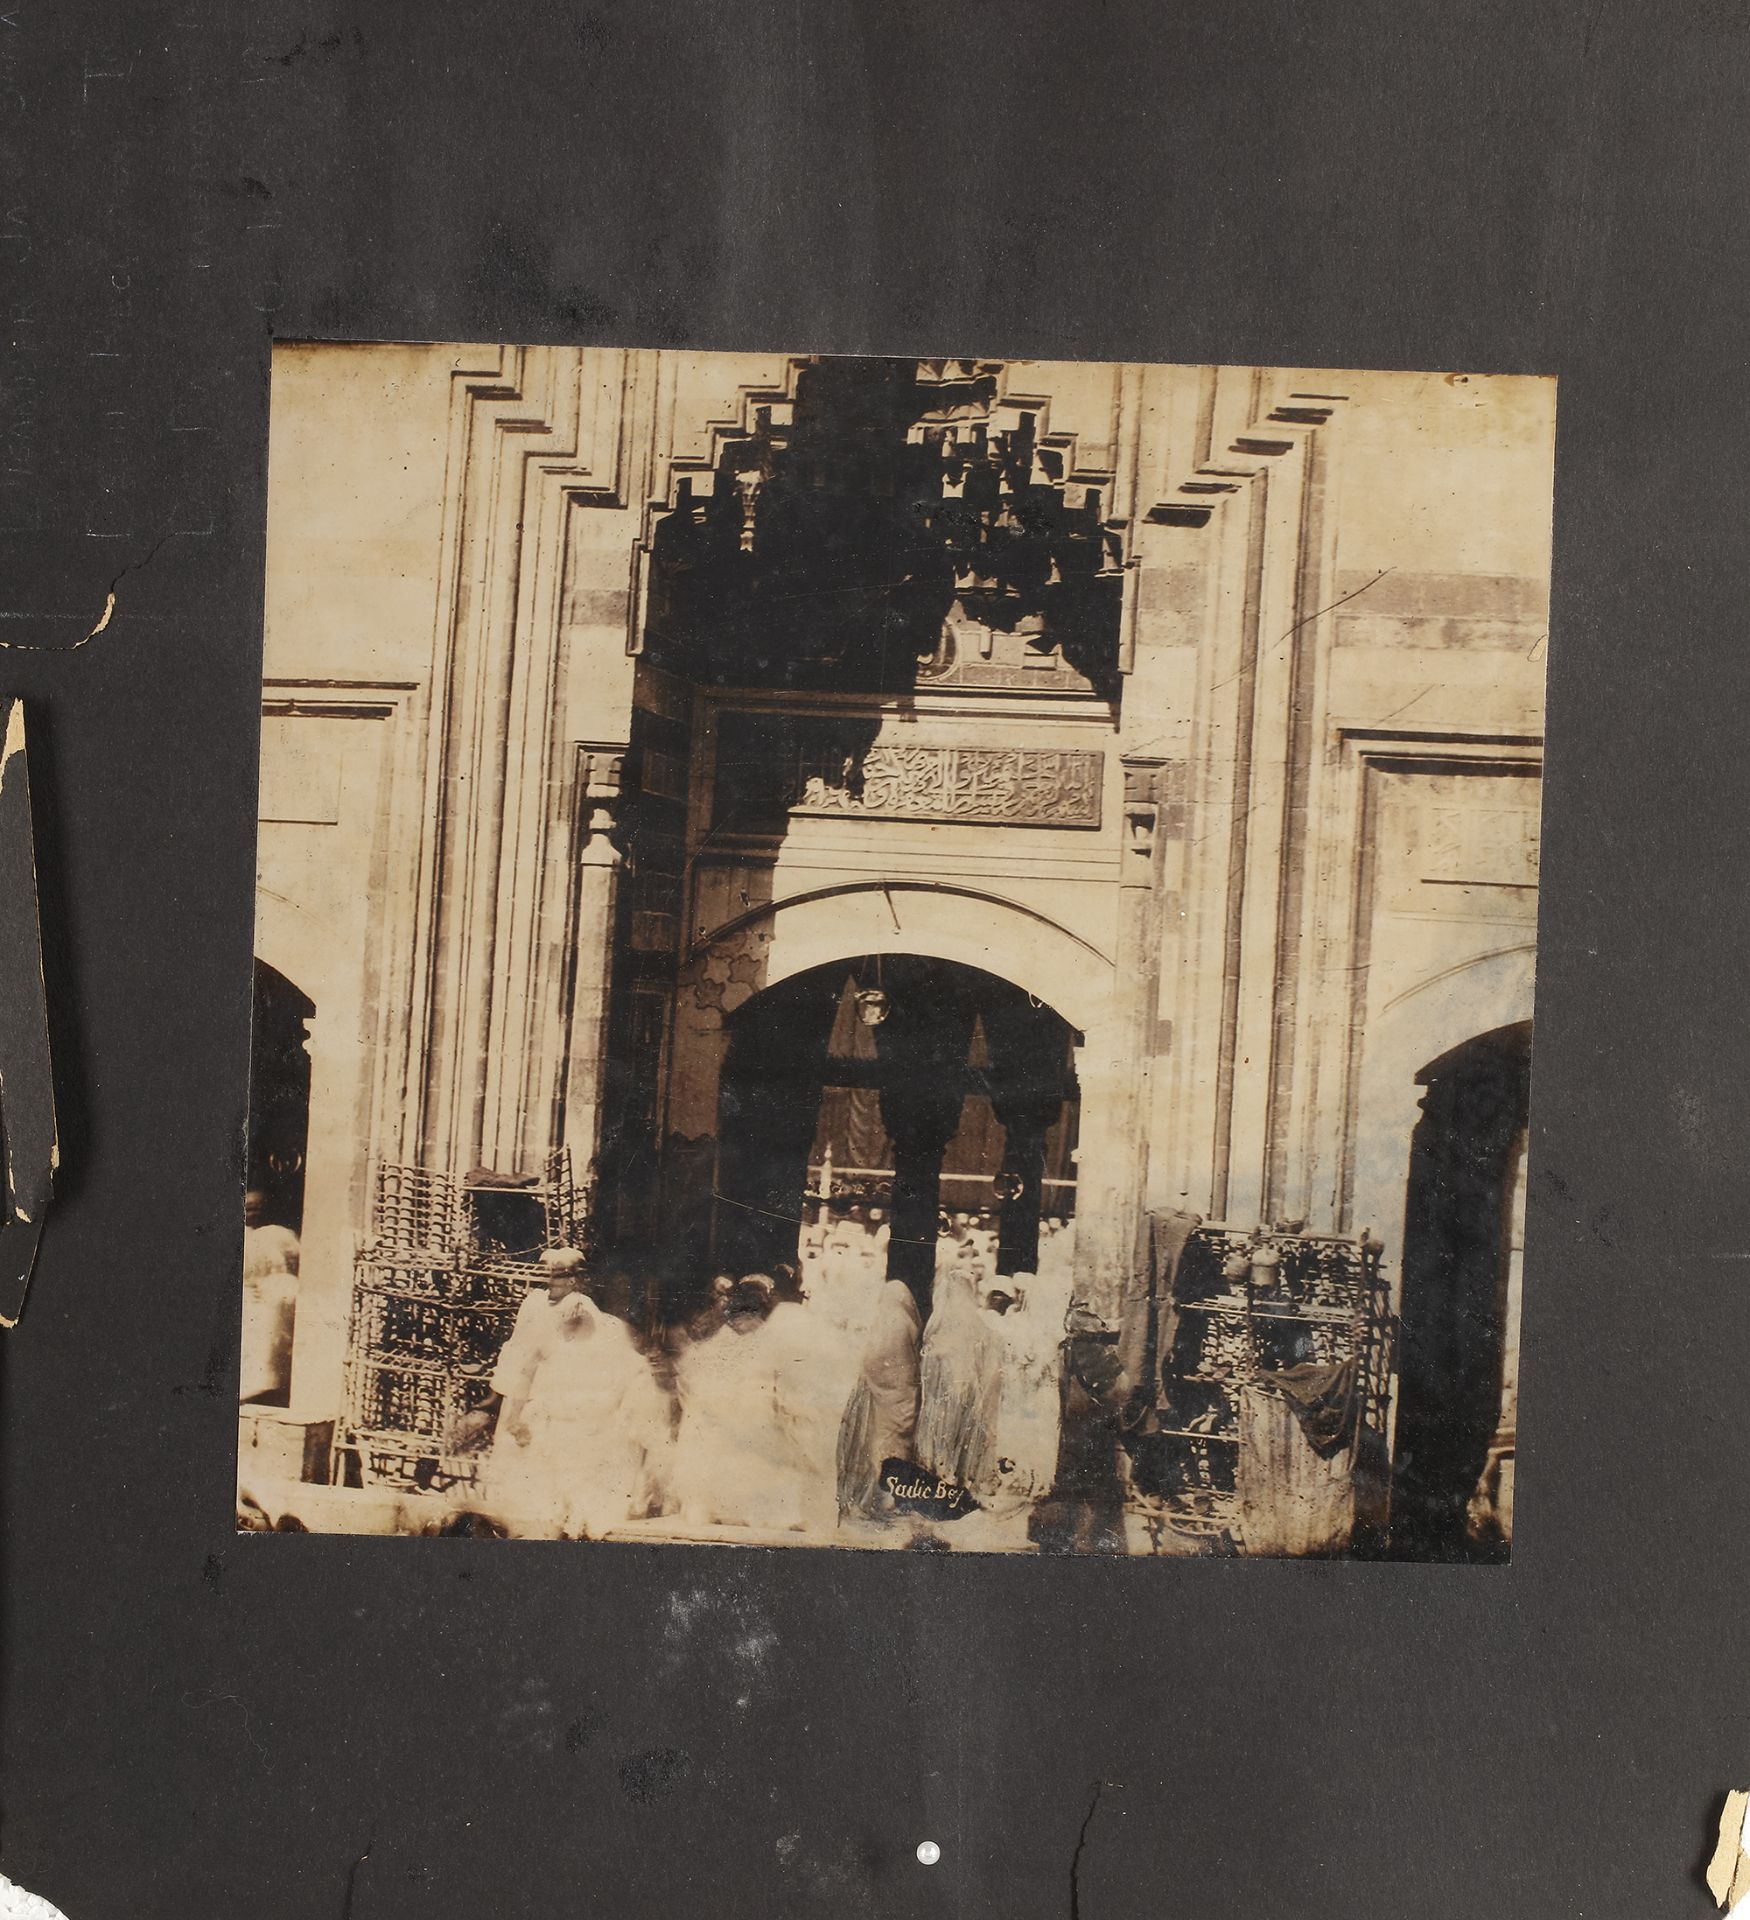 MECCA AND MEDINA, A COLLECTION OF 14 PHOTOGRAPHS DURING THE HAJJ, EARLY 20TH CENTURY - Image 6 of 15